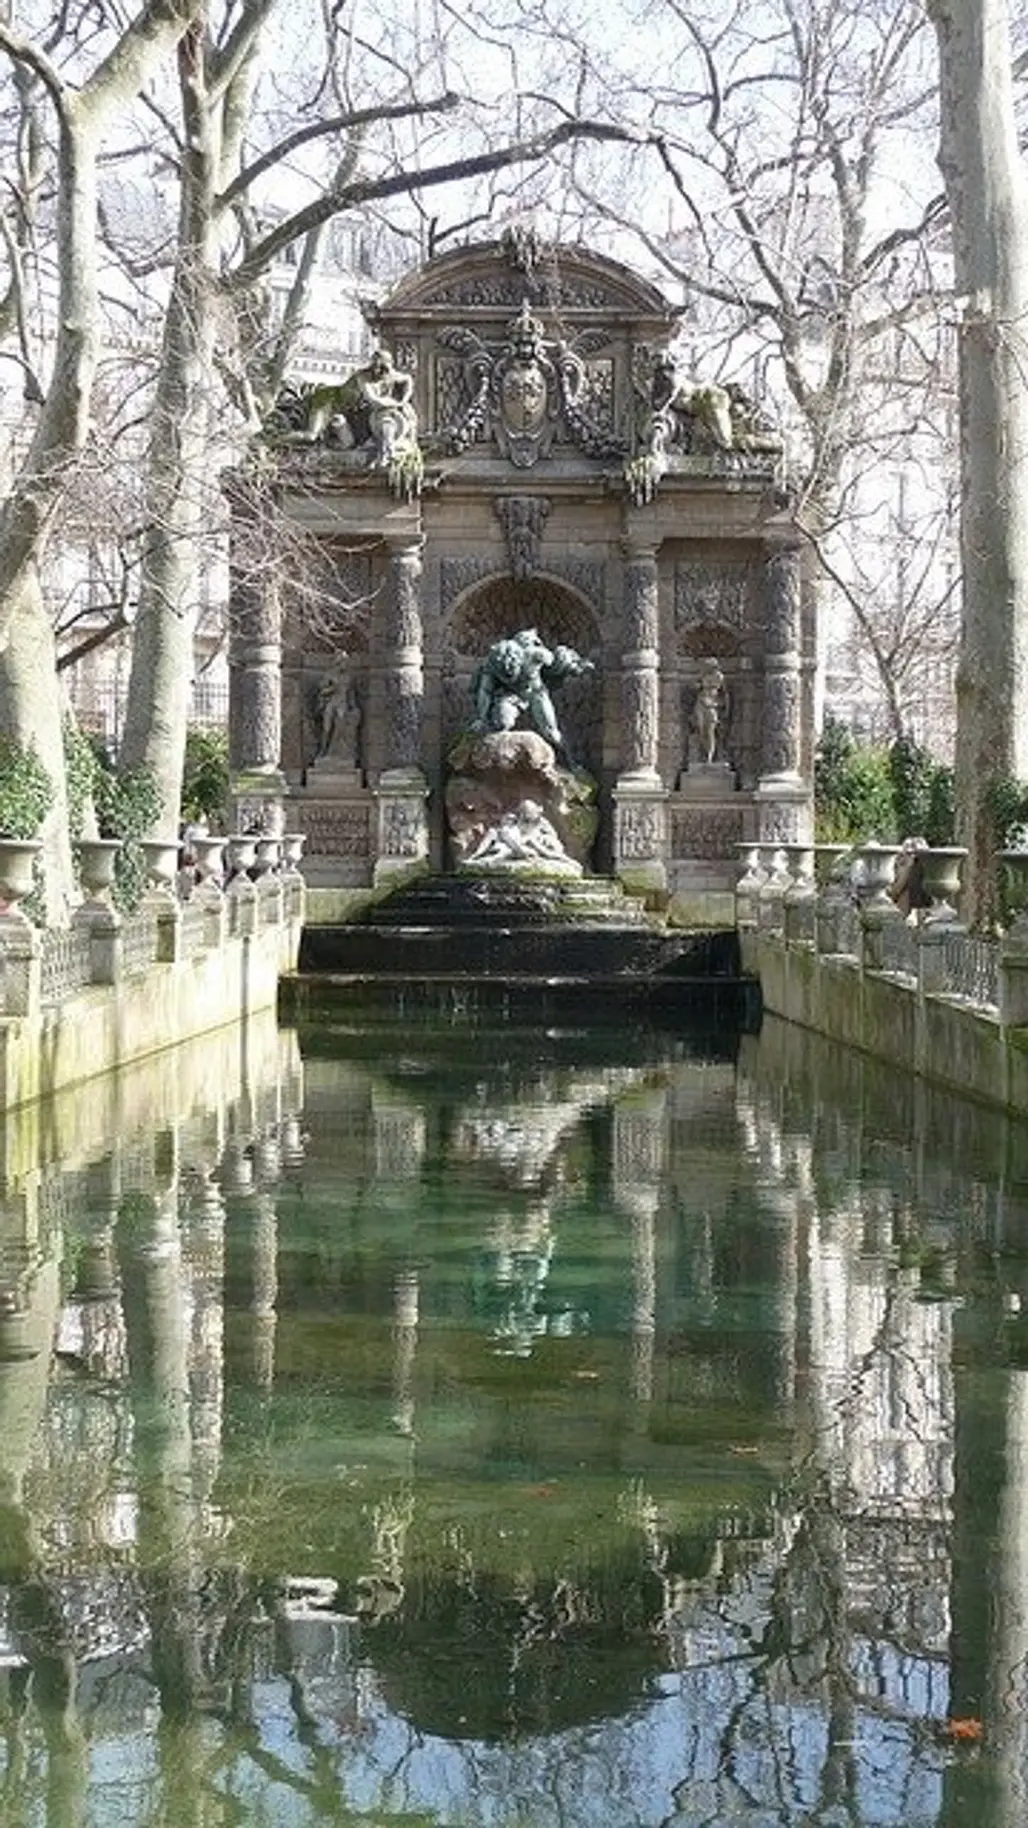 Luxembourg Gardens,tree,reflection,reflecting pool,pond,